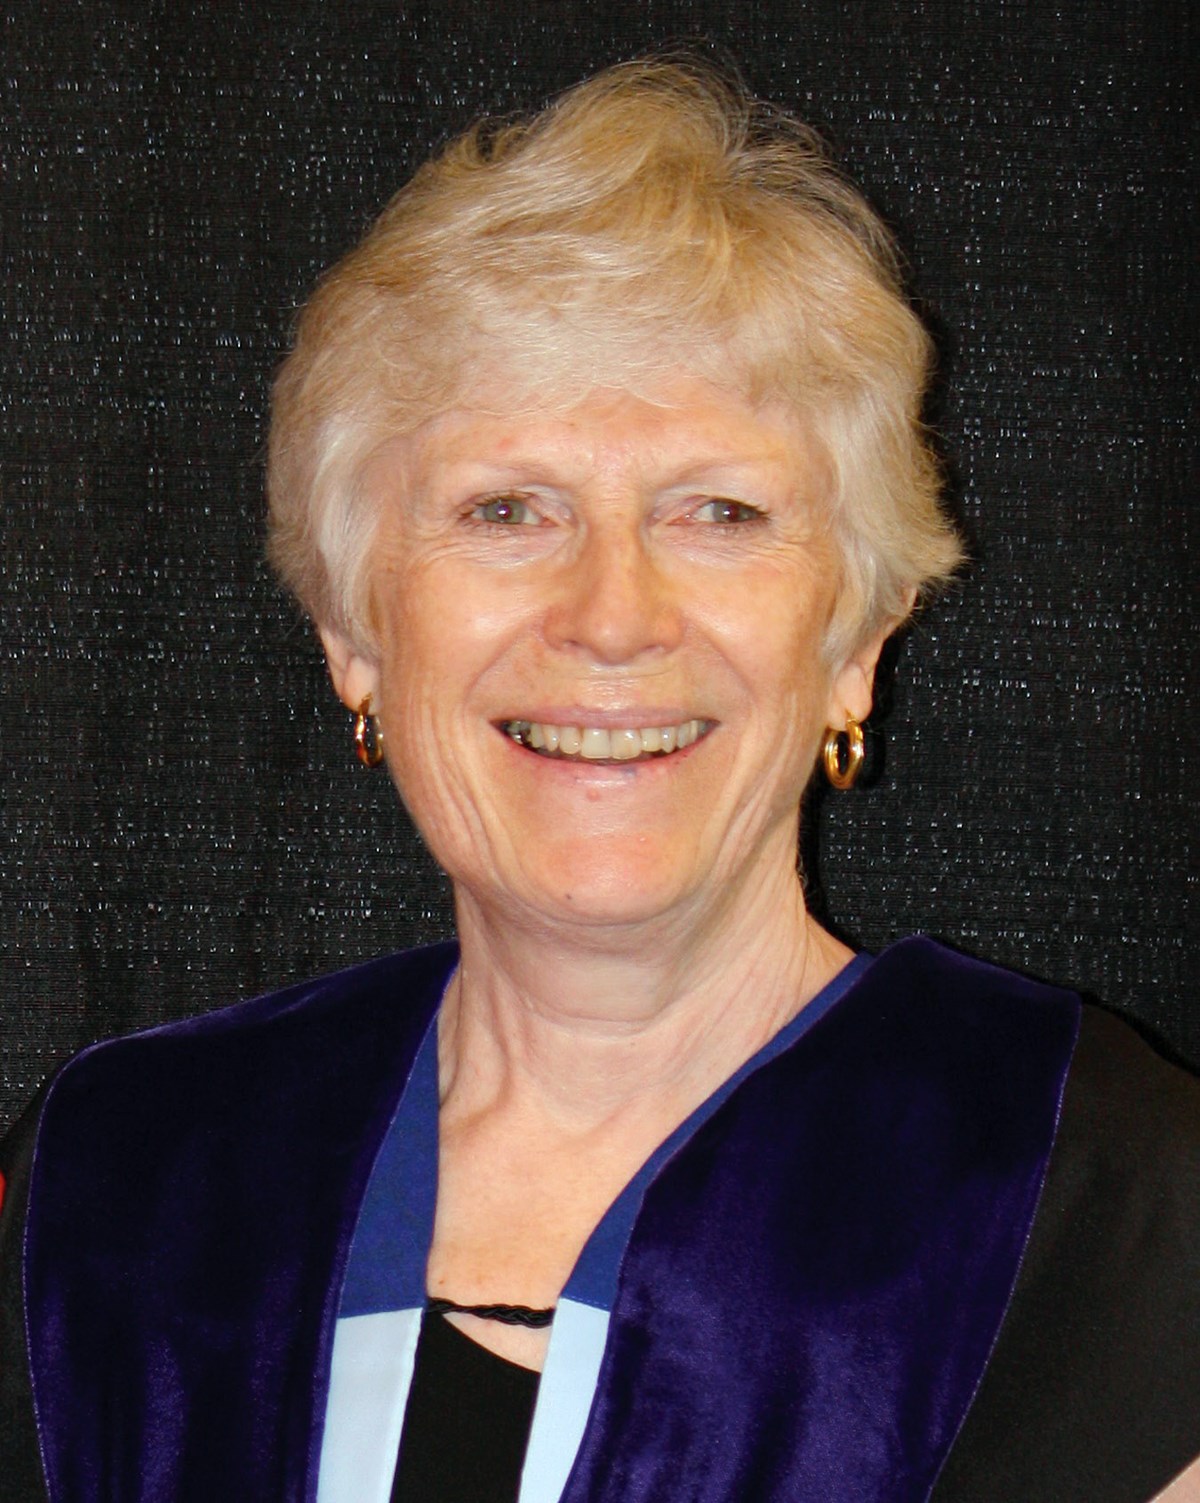 Pat Armstrong is a Distinguished Research Professor of Sociology at York University in Toronto. She held a CHSRF/CIHR Chair in Health Services and Nursing Research, and has published on a wide variety of issues related to long-term care, health care policy, and women’s health. 